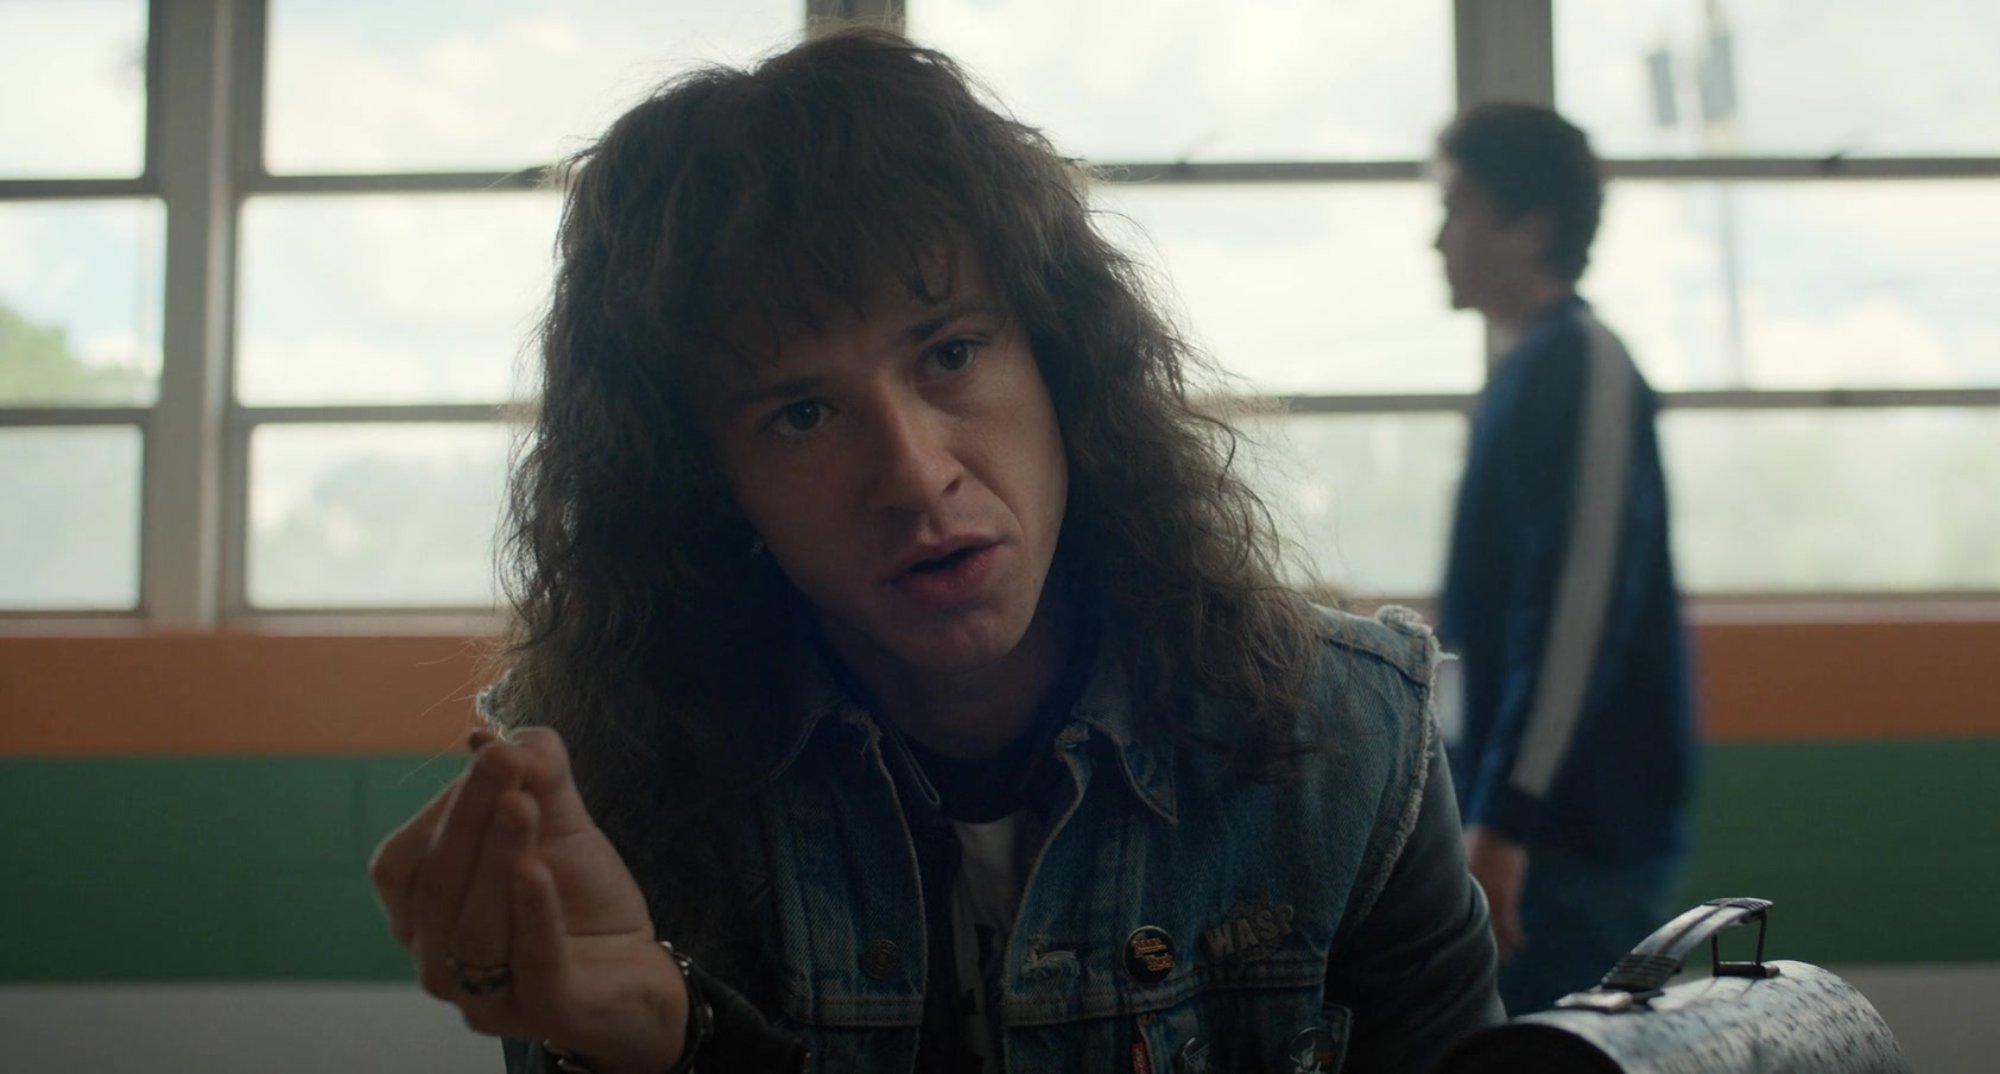 Eddie Munson's hankerchief hinting at his sexulaity in 'Stranger Things' Season 4 while seen in cafeteria 